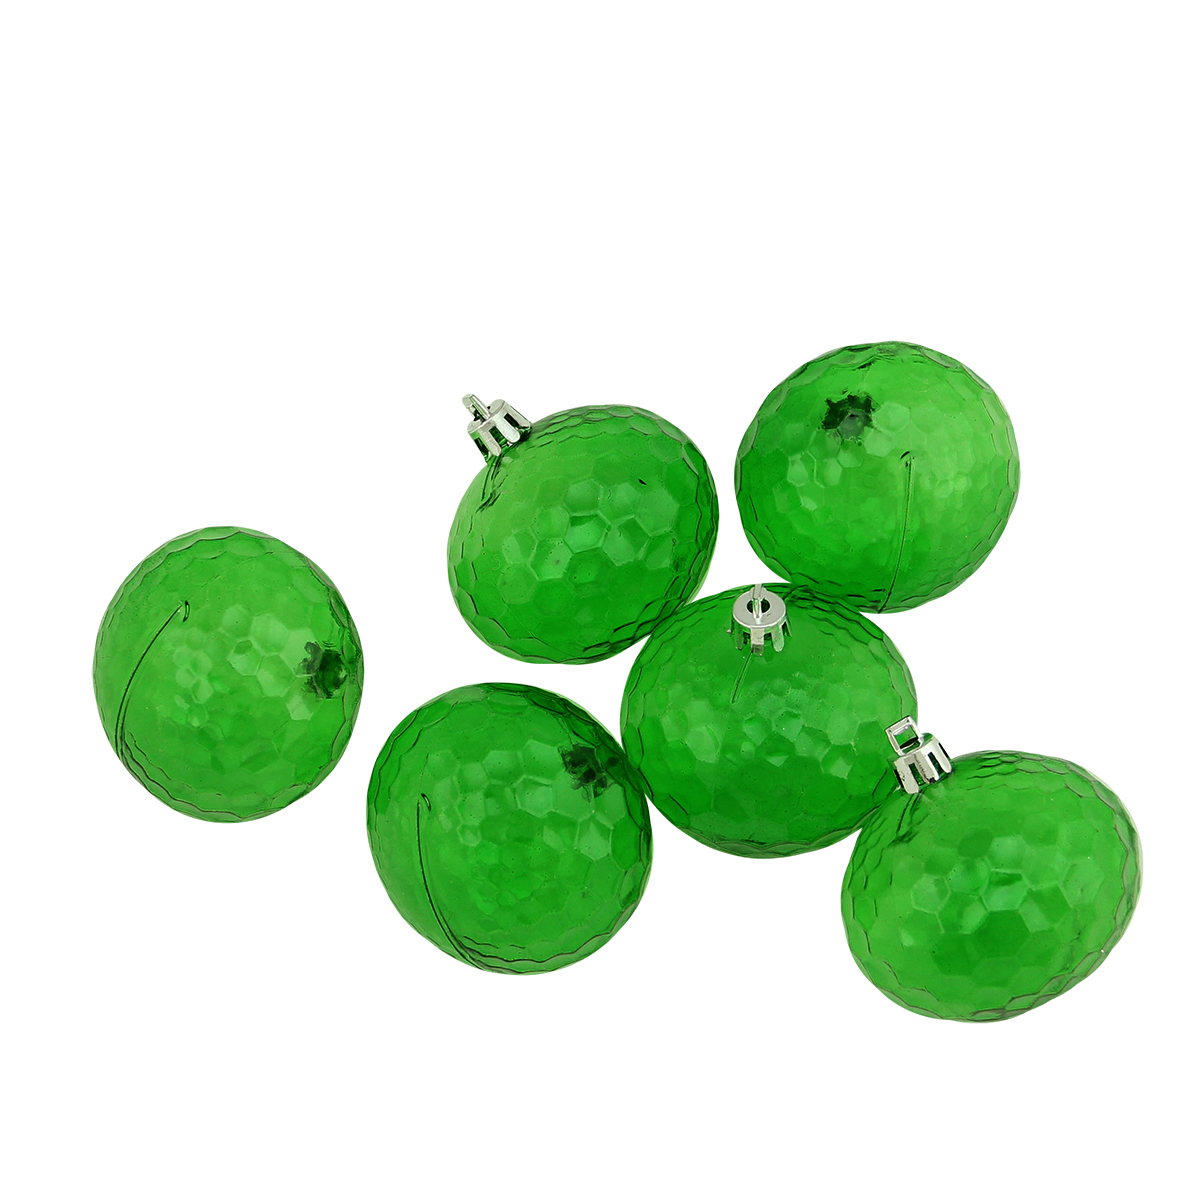 Northlight 6ct Green Shatterproof Transparent Hammered Christmas Disco Ball Ornaments 2.5" (60mm)